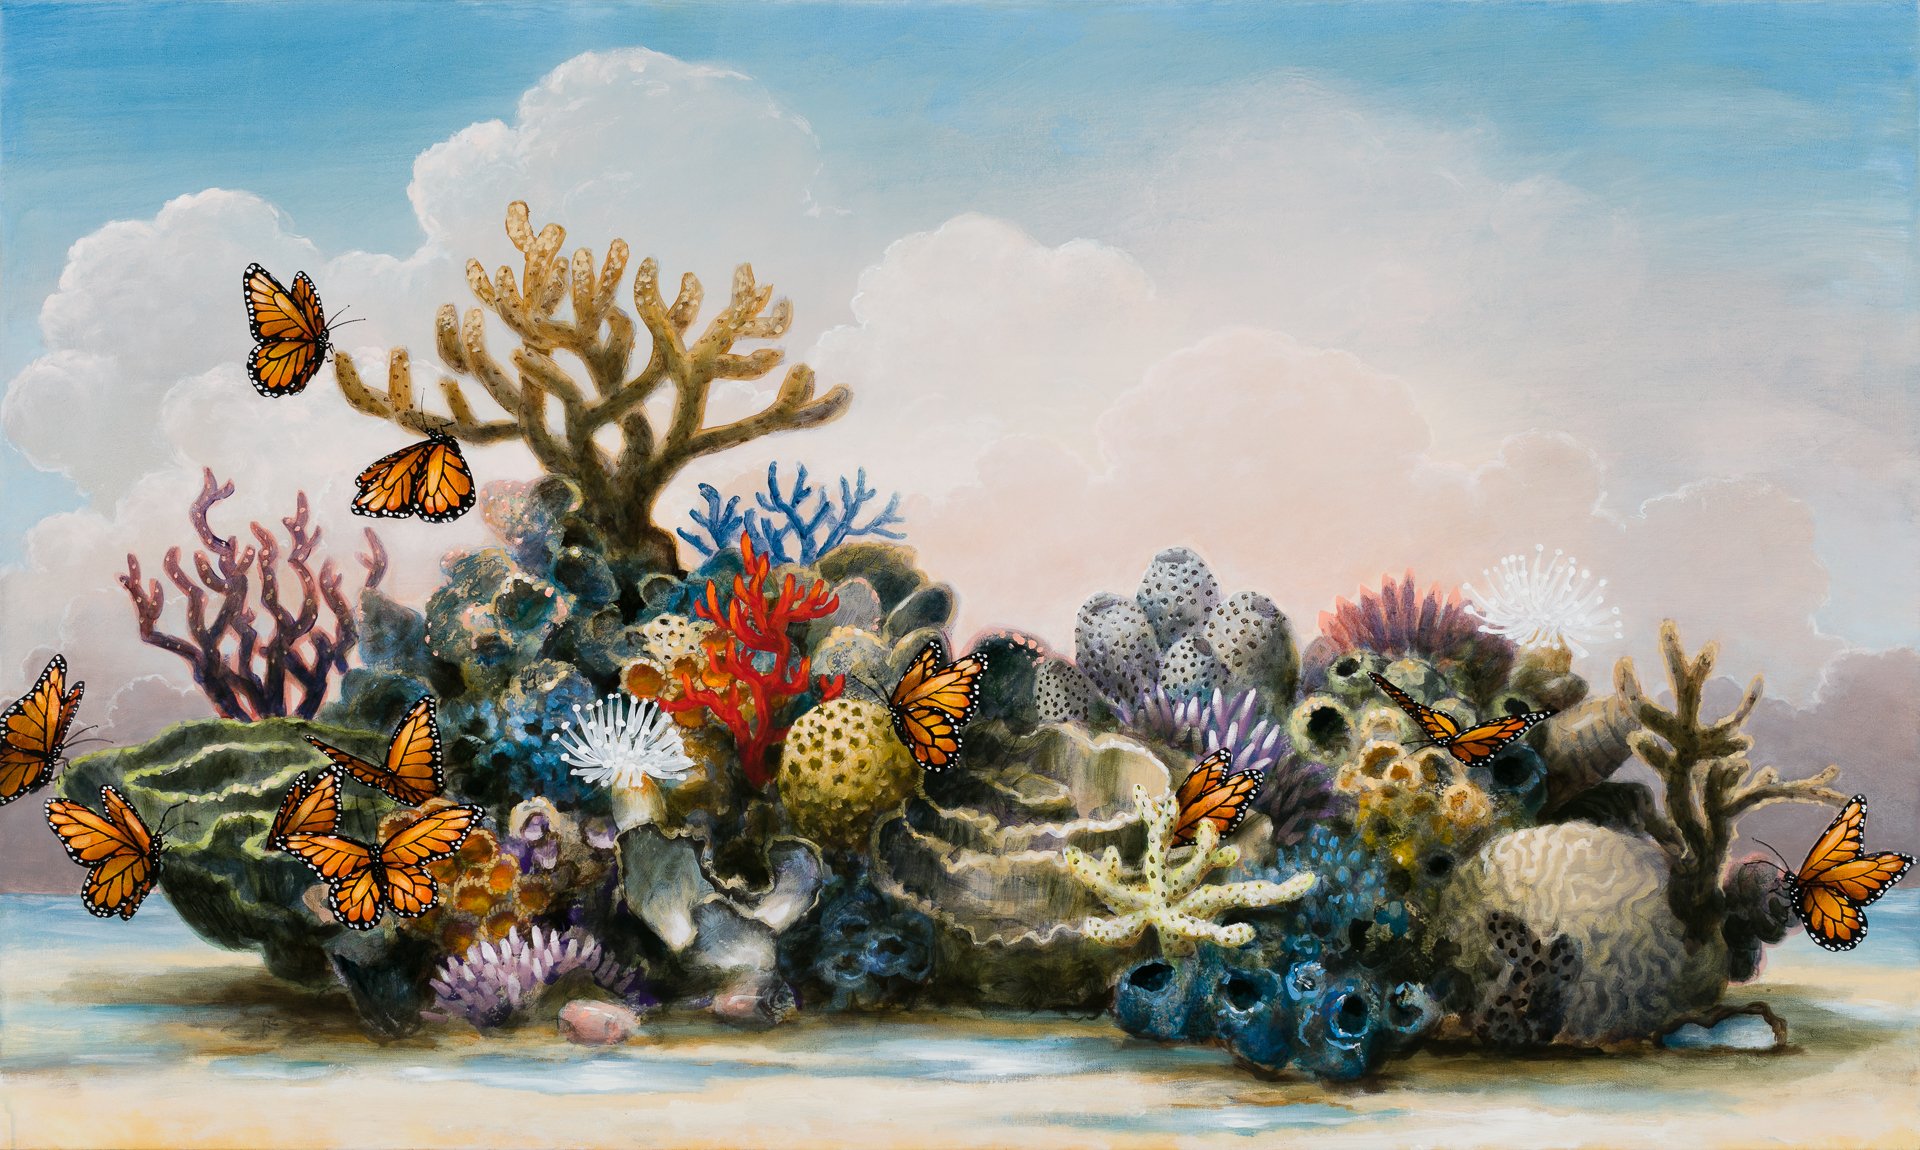 Bouquet at Low Tide, 36"x60", acrylic on canvas